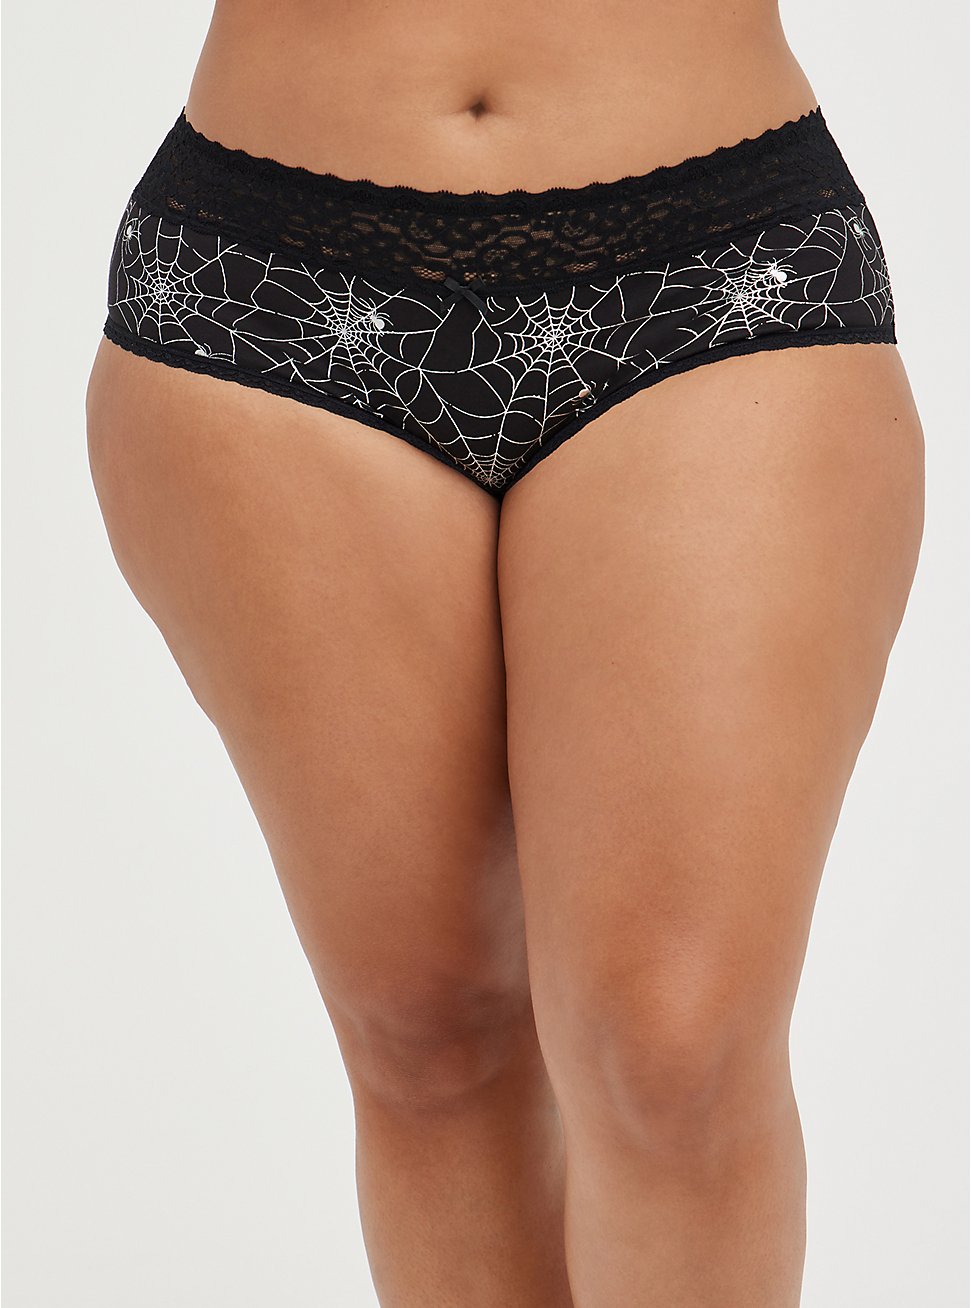 Plus Size Wide Lace Trim Cheeky Panty - Cotton Webs Black And Silver, RAINBOW WEBS, hi-res